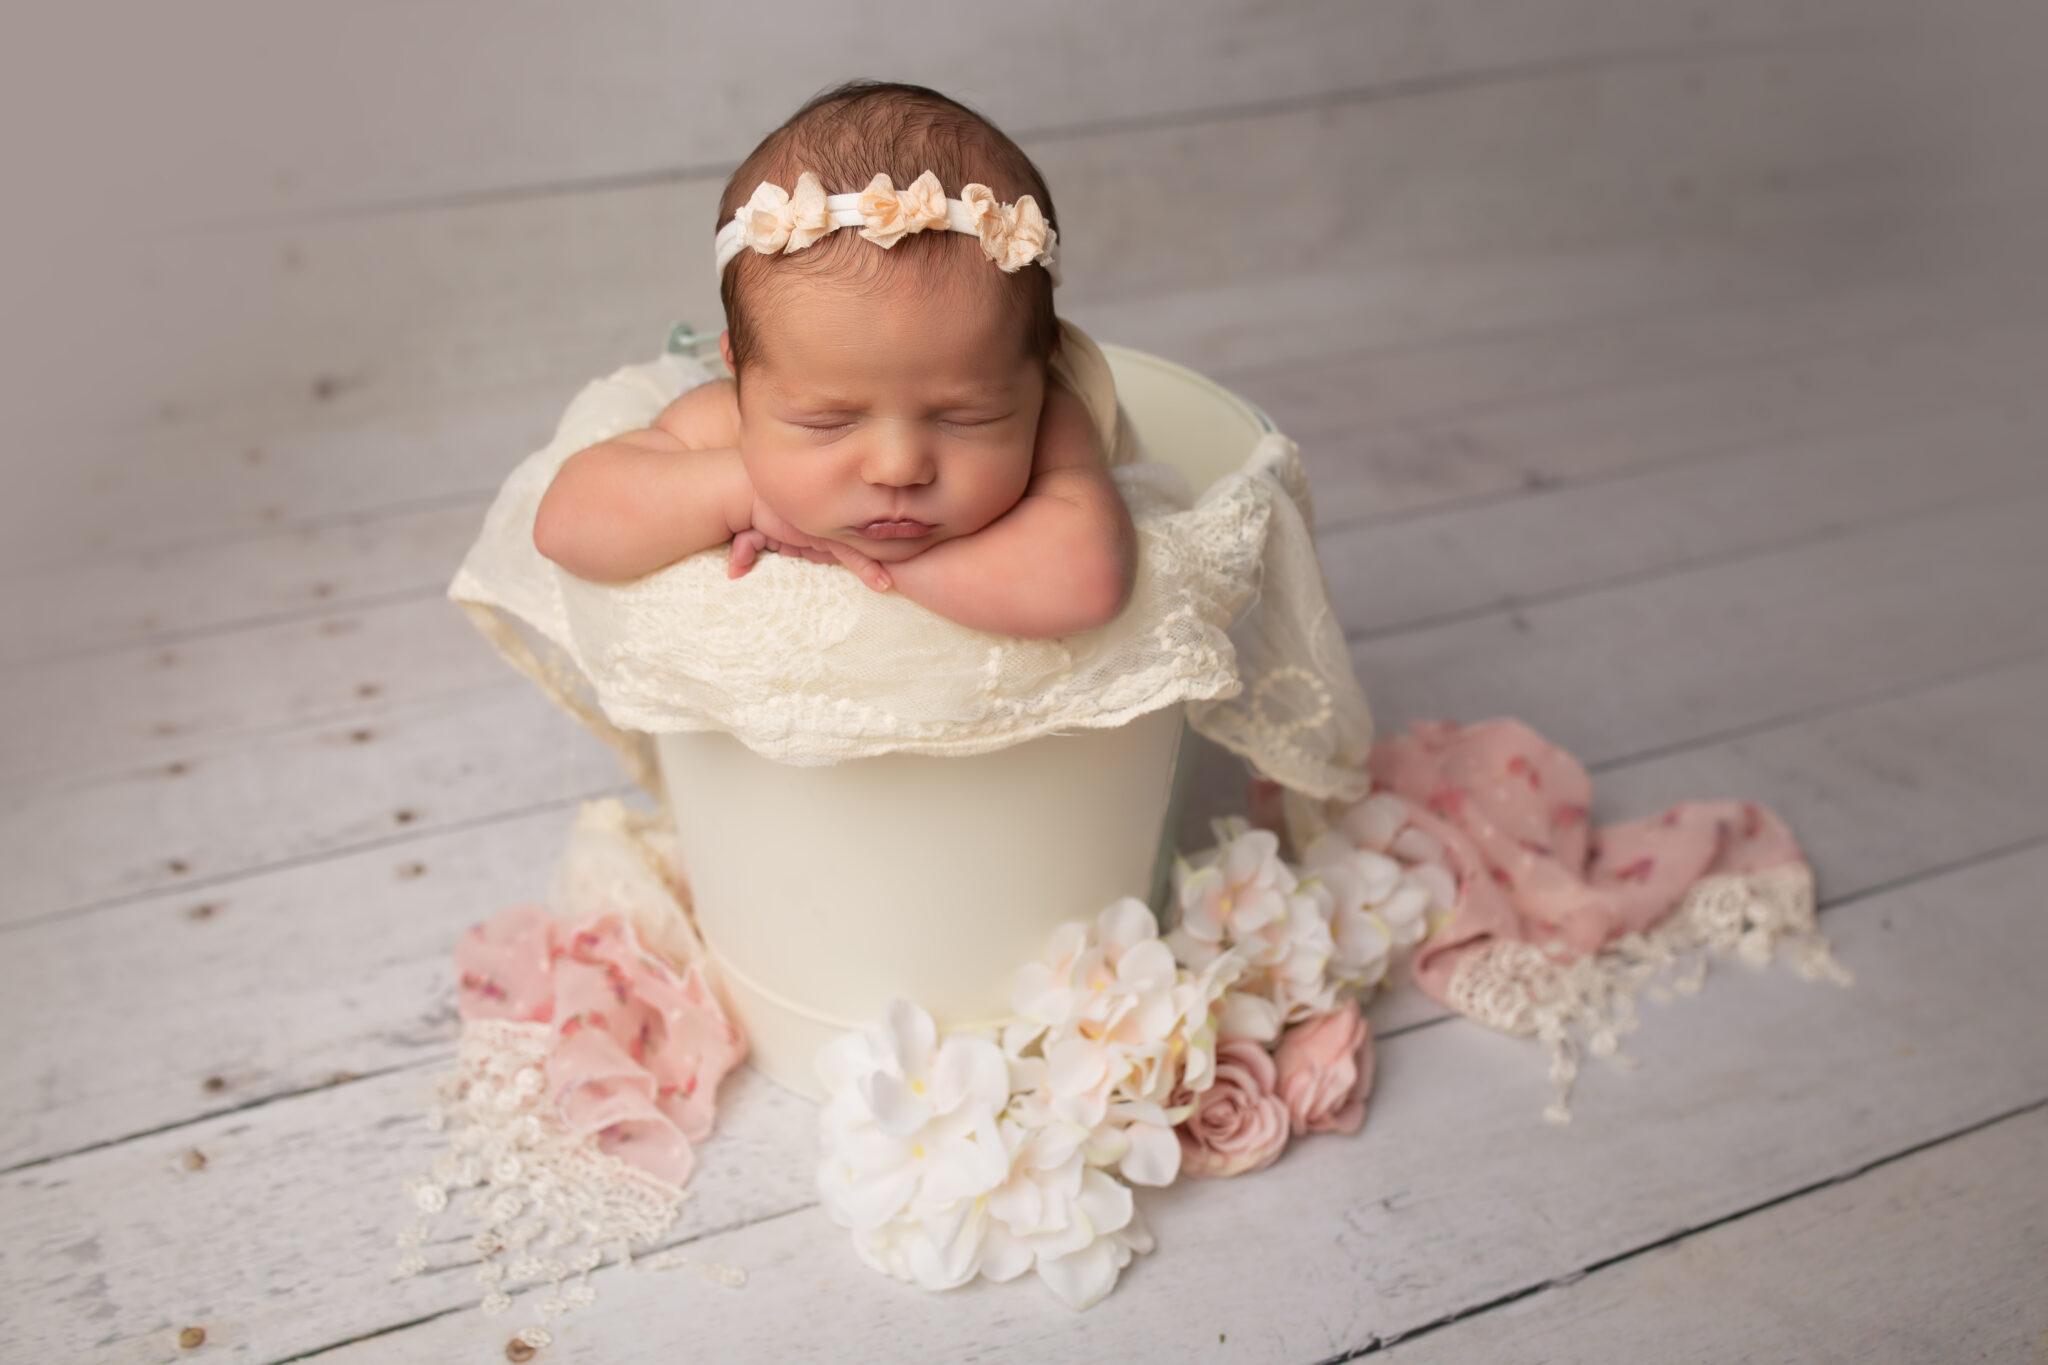 Dallas newborn photographer poses baby girl in cream colored bucket with chin on hands surrounded by flowers and lace scarf for texture